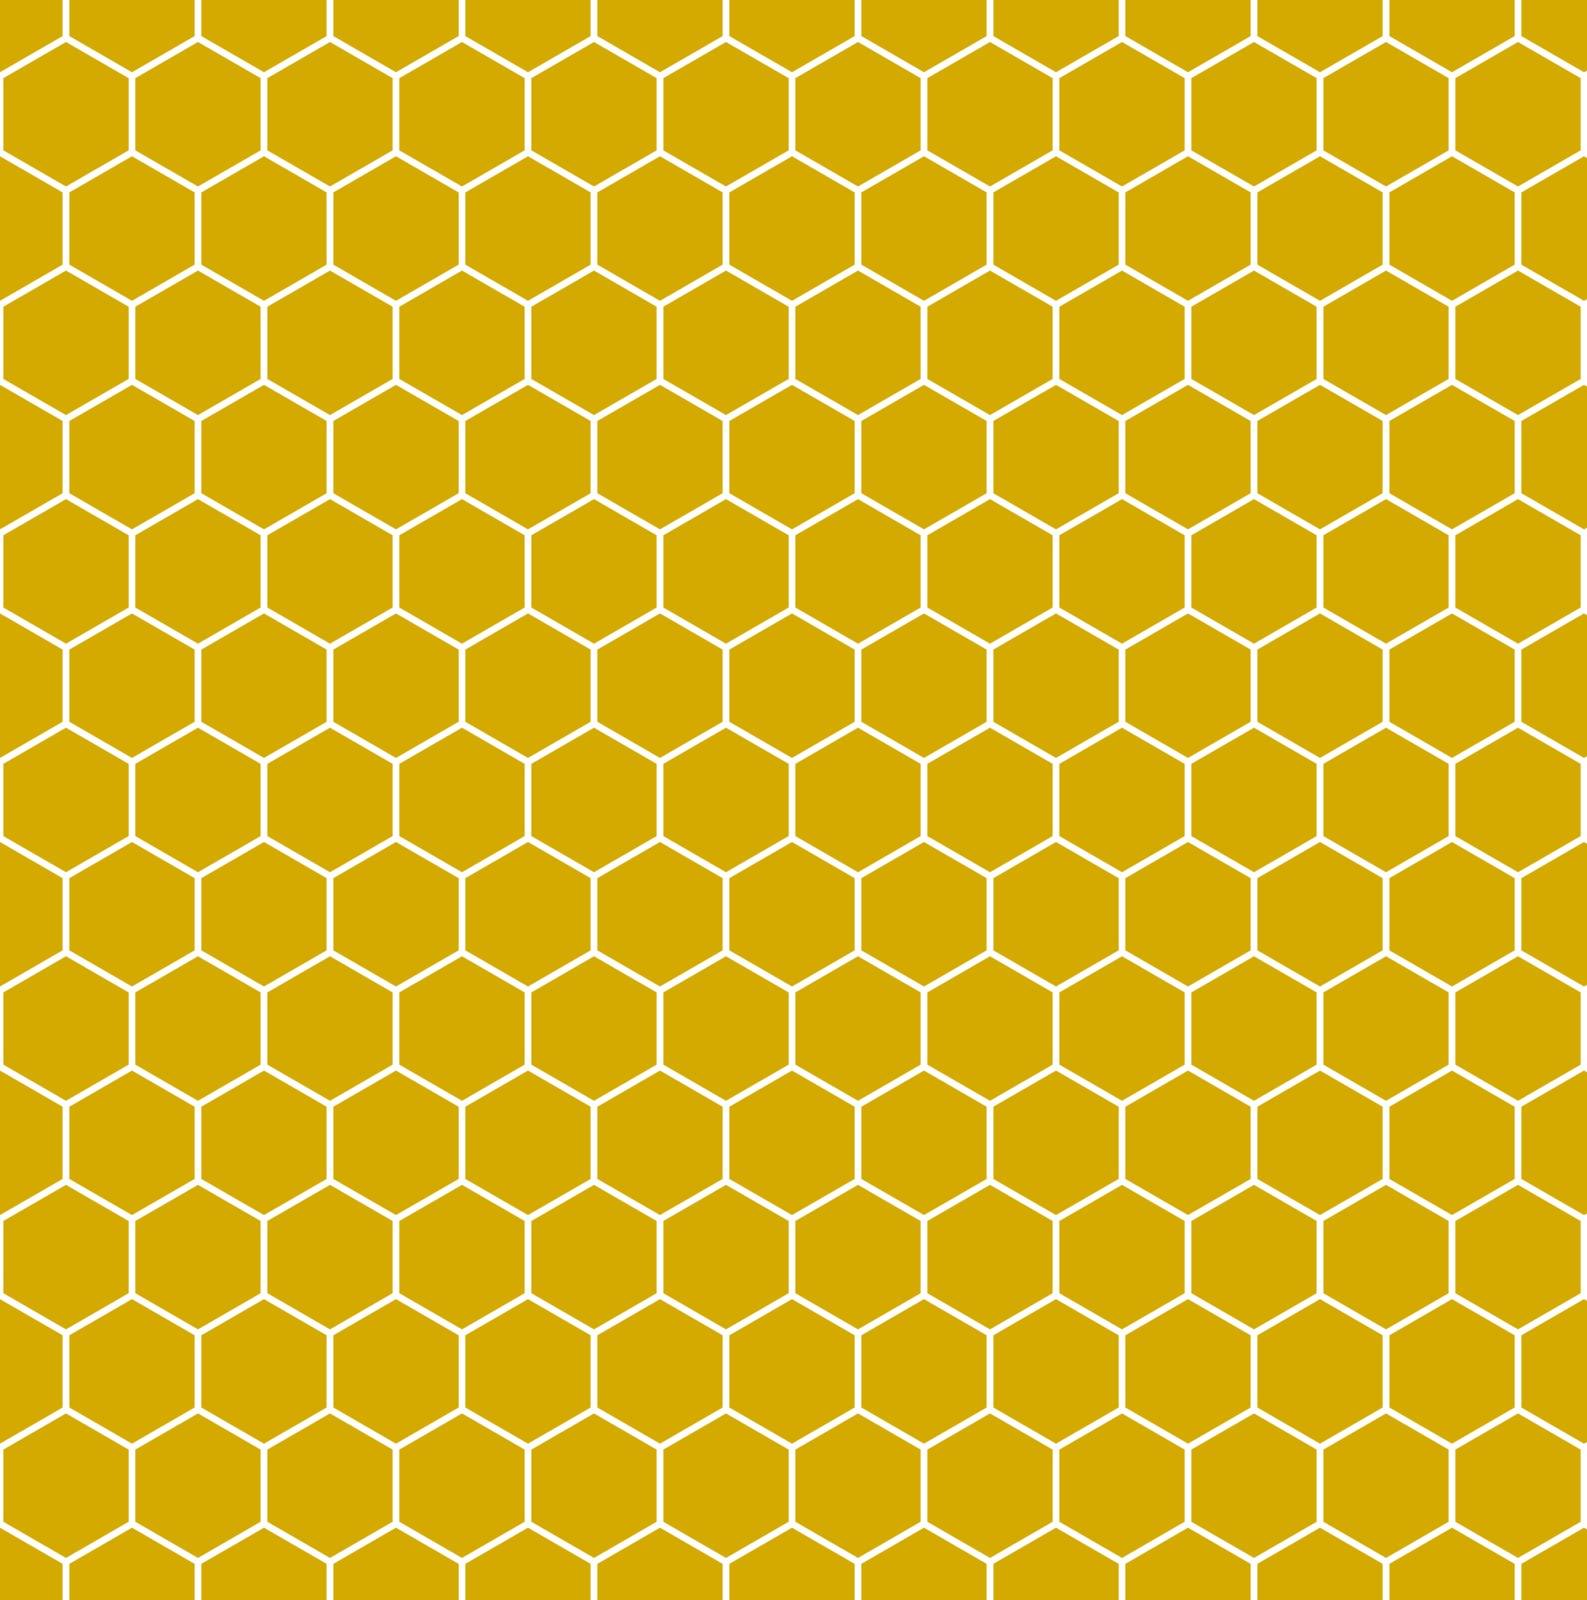 Seamless hexagonal background in yellow with white borders. Vector illustration.